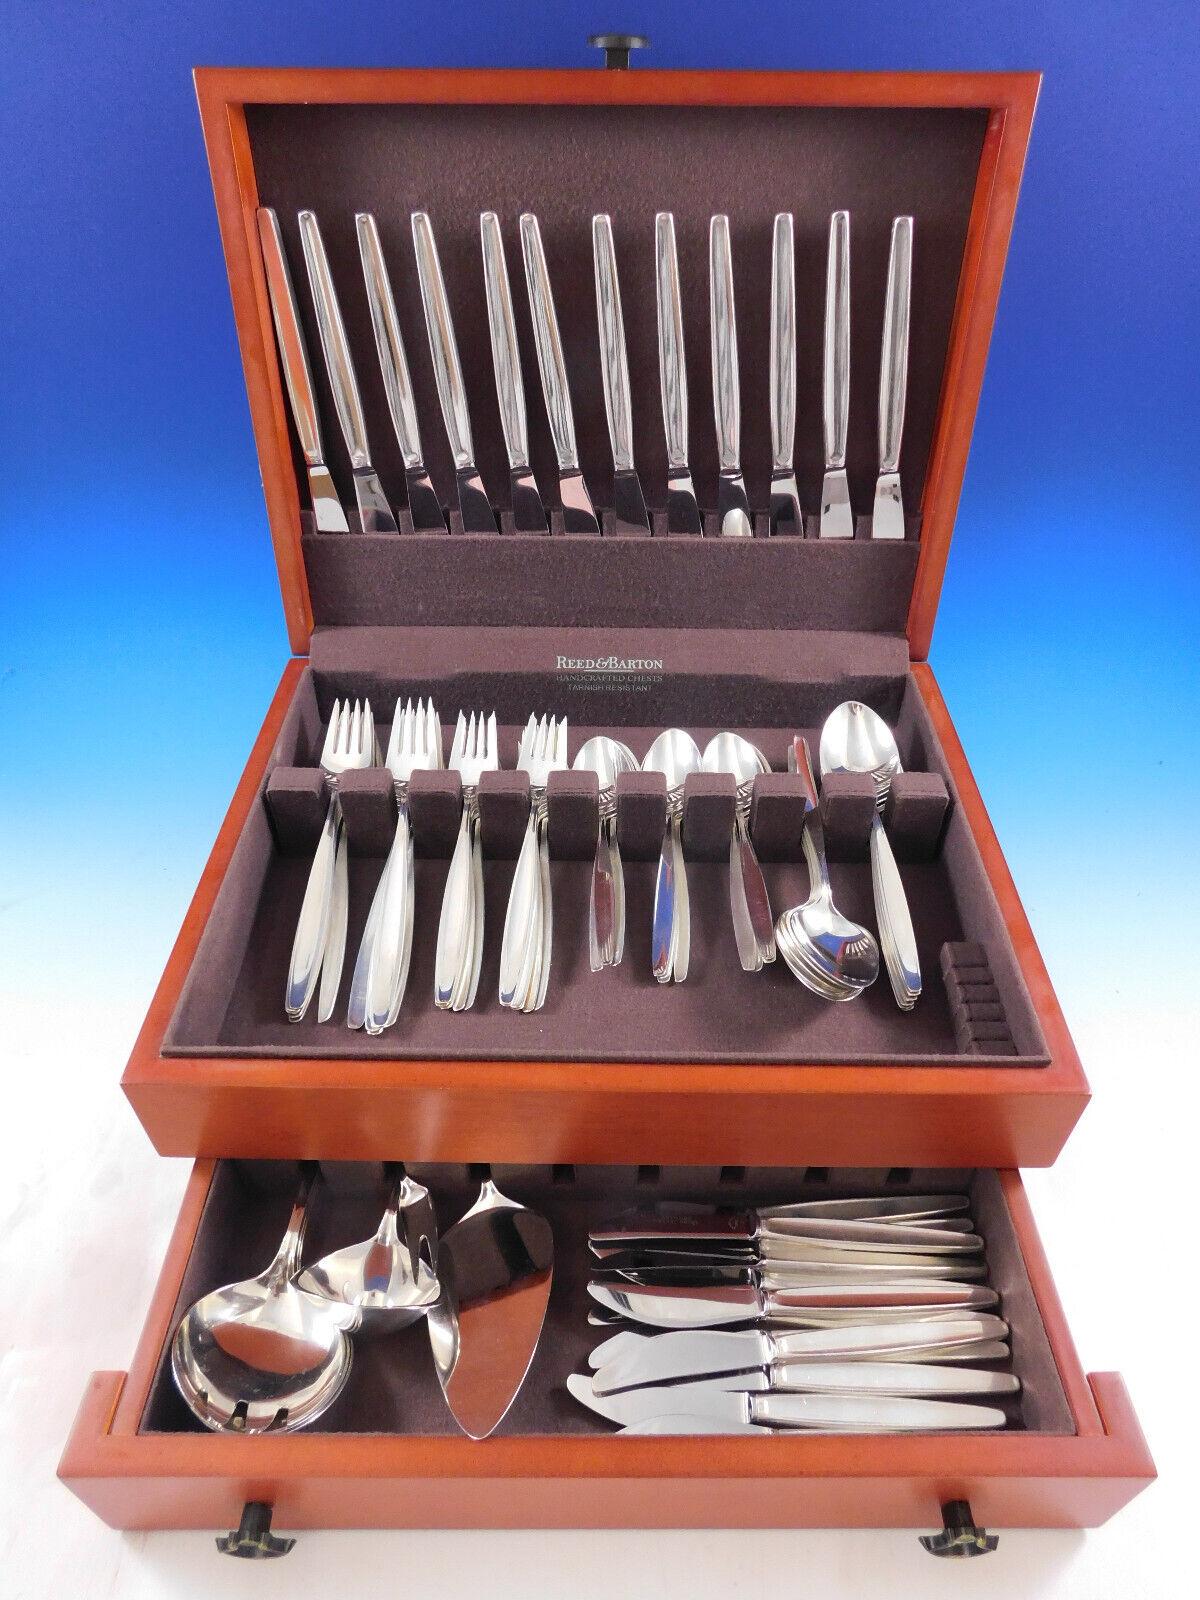 Mid-Century Modern Cypress by Georg Jensen sterling silver Flatware set, 77 pieces. This set includes:

12 Dinner Size Knives, long handle, 8 7/8